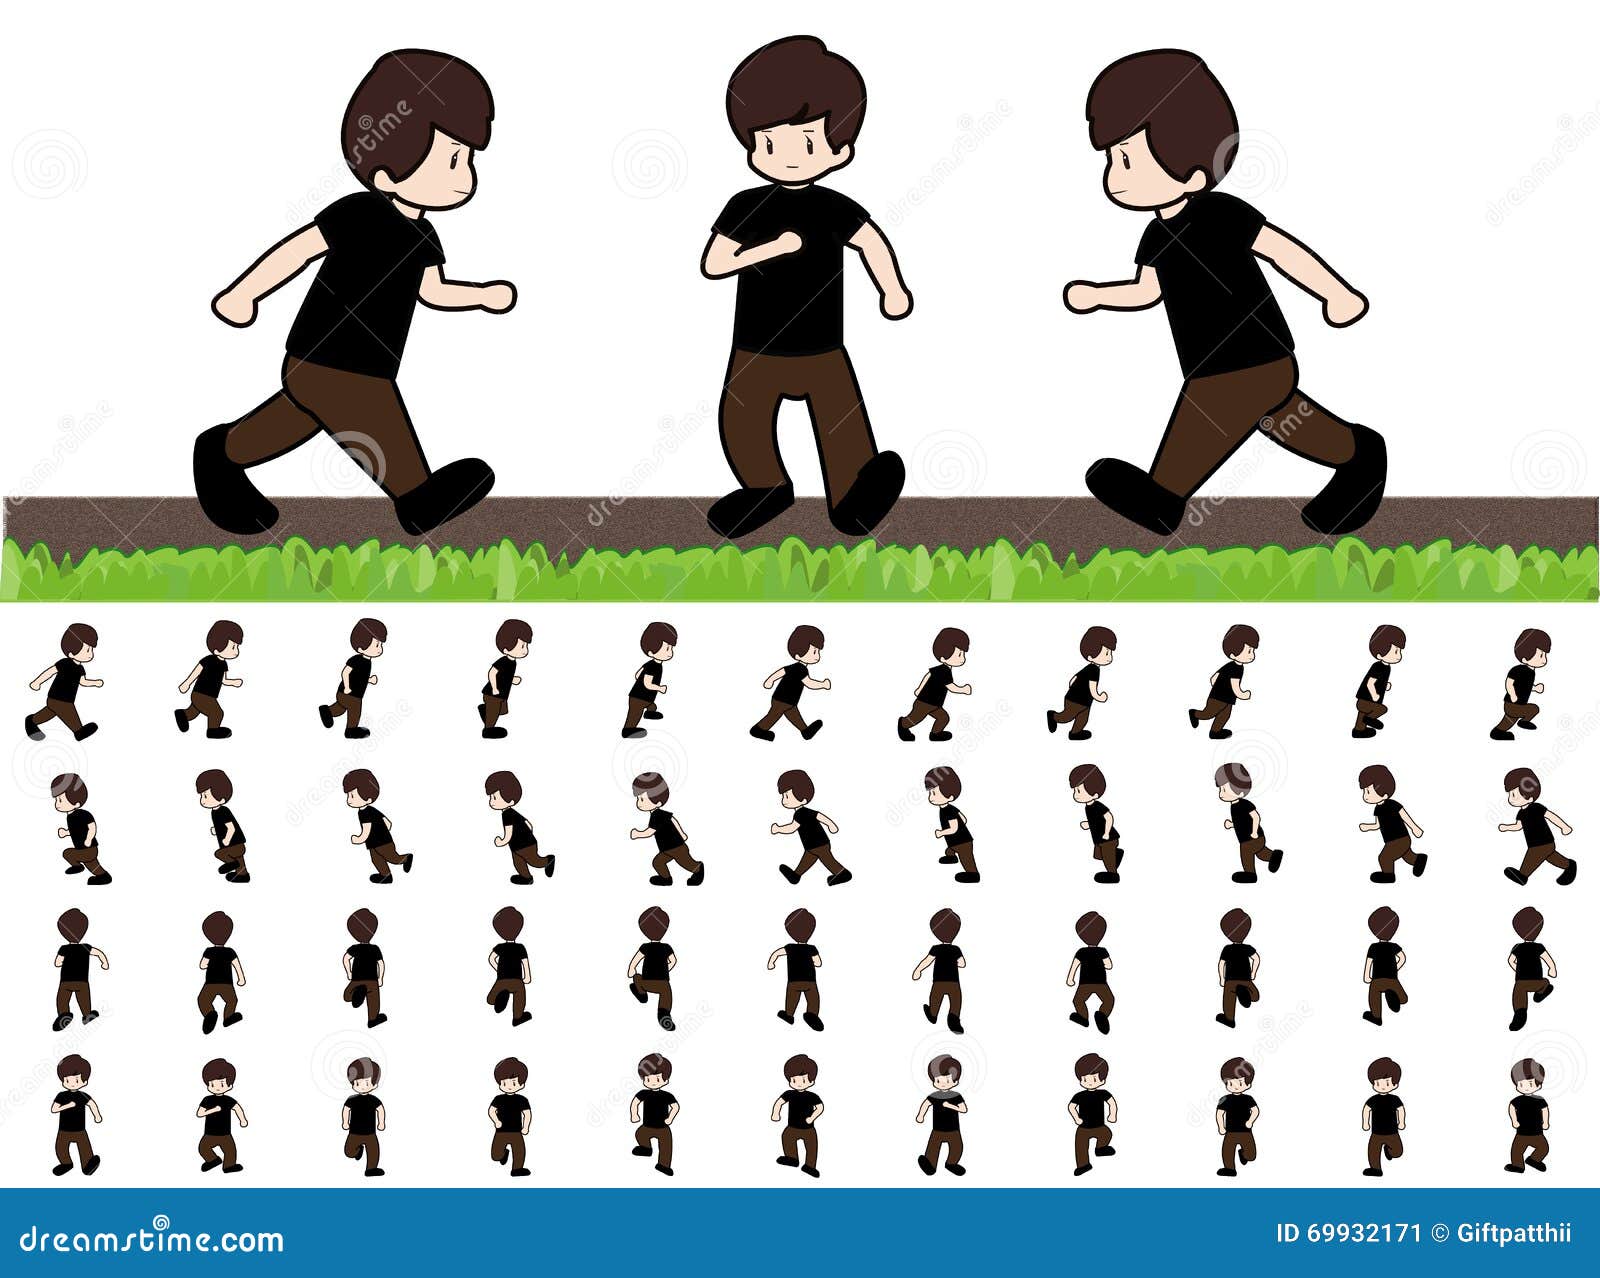 Phases of Step Movements Man in Running Walk Sequence for Game Animation  Stock Illustration - Illustration of human, cute: 69932171